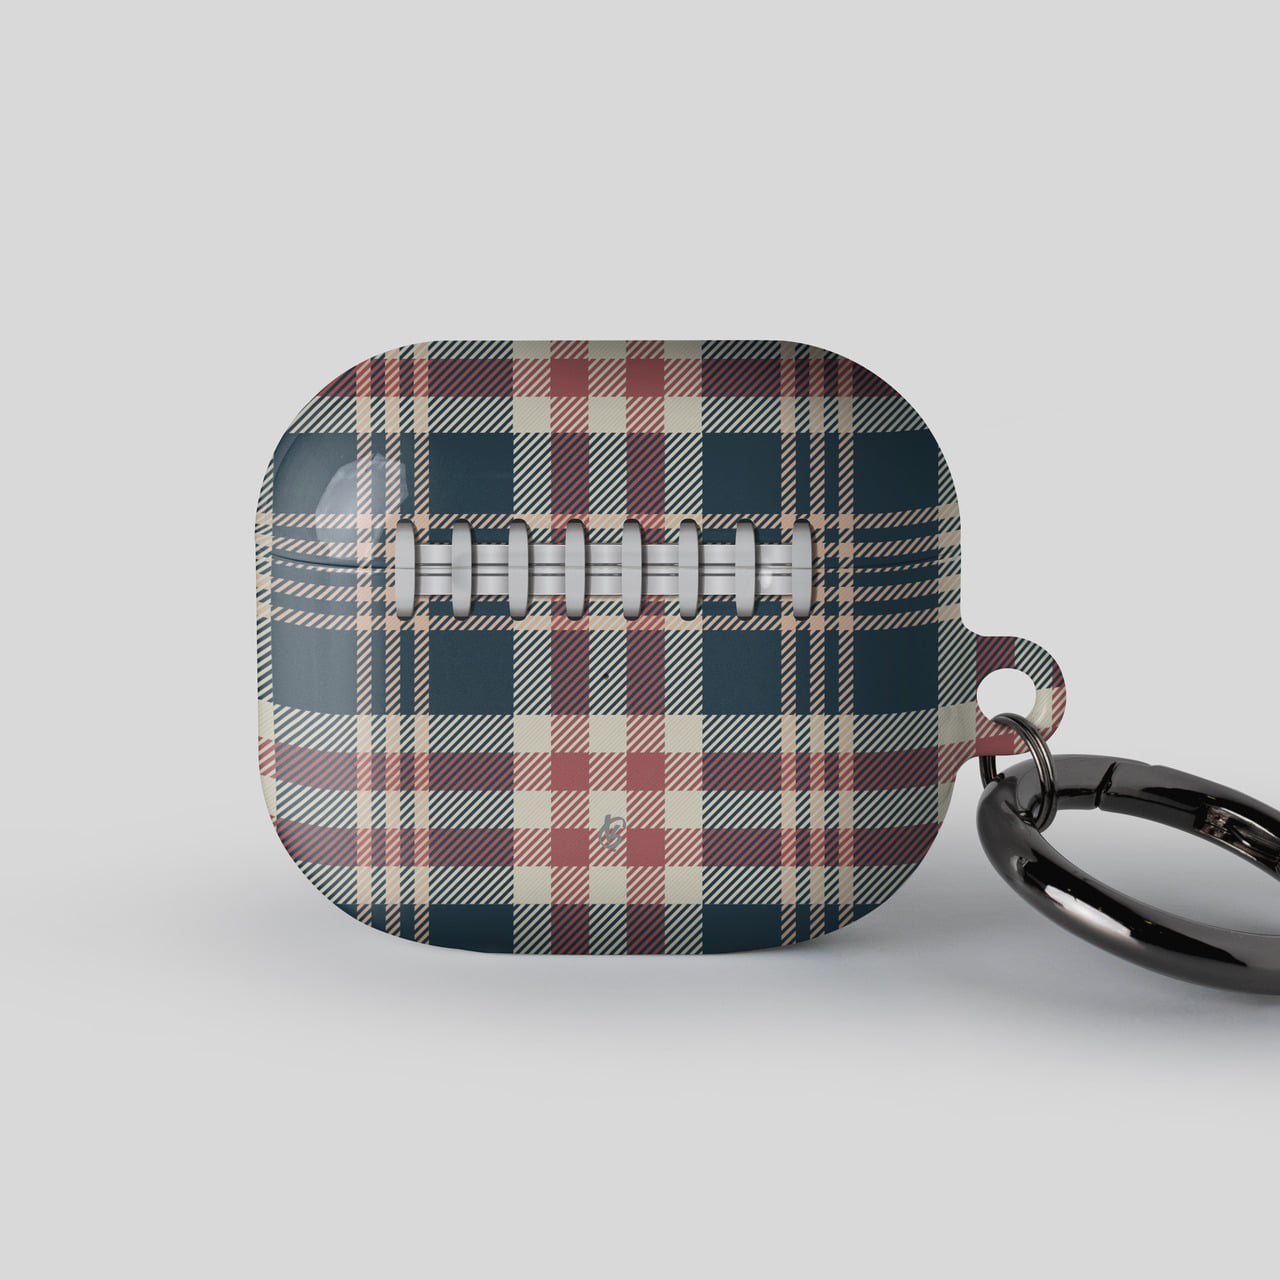 [Airpods cases] FRAT No.10